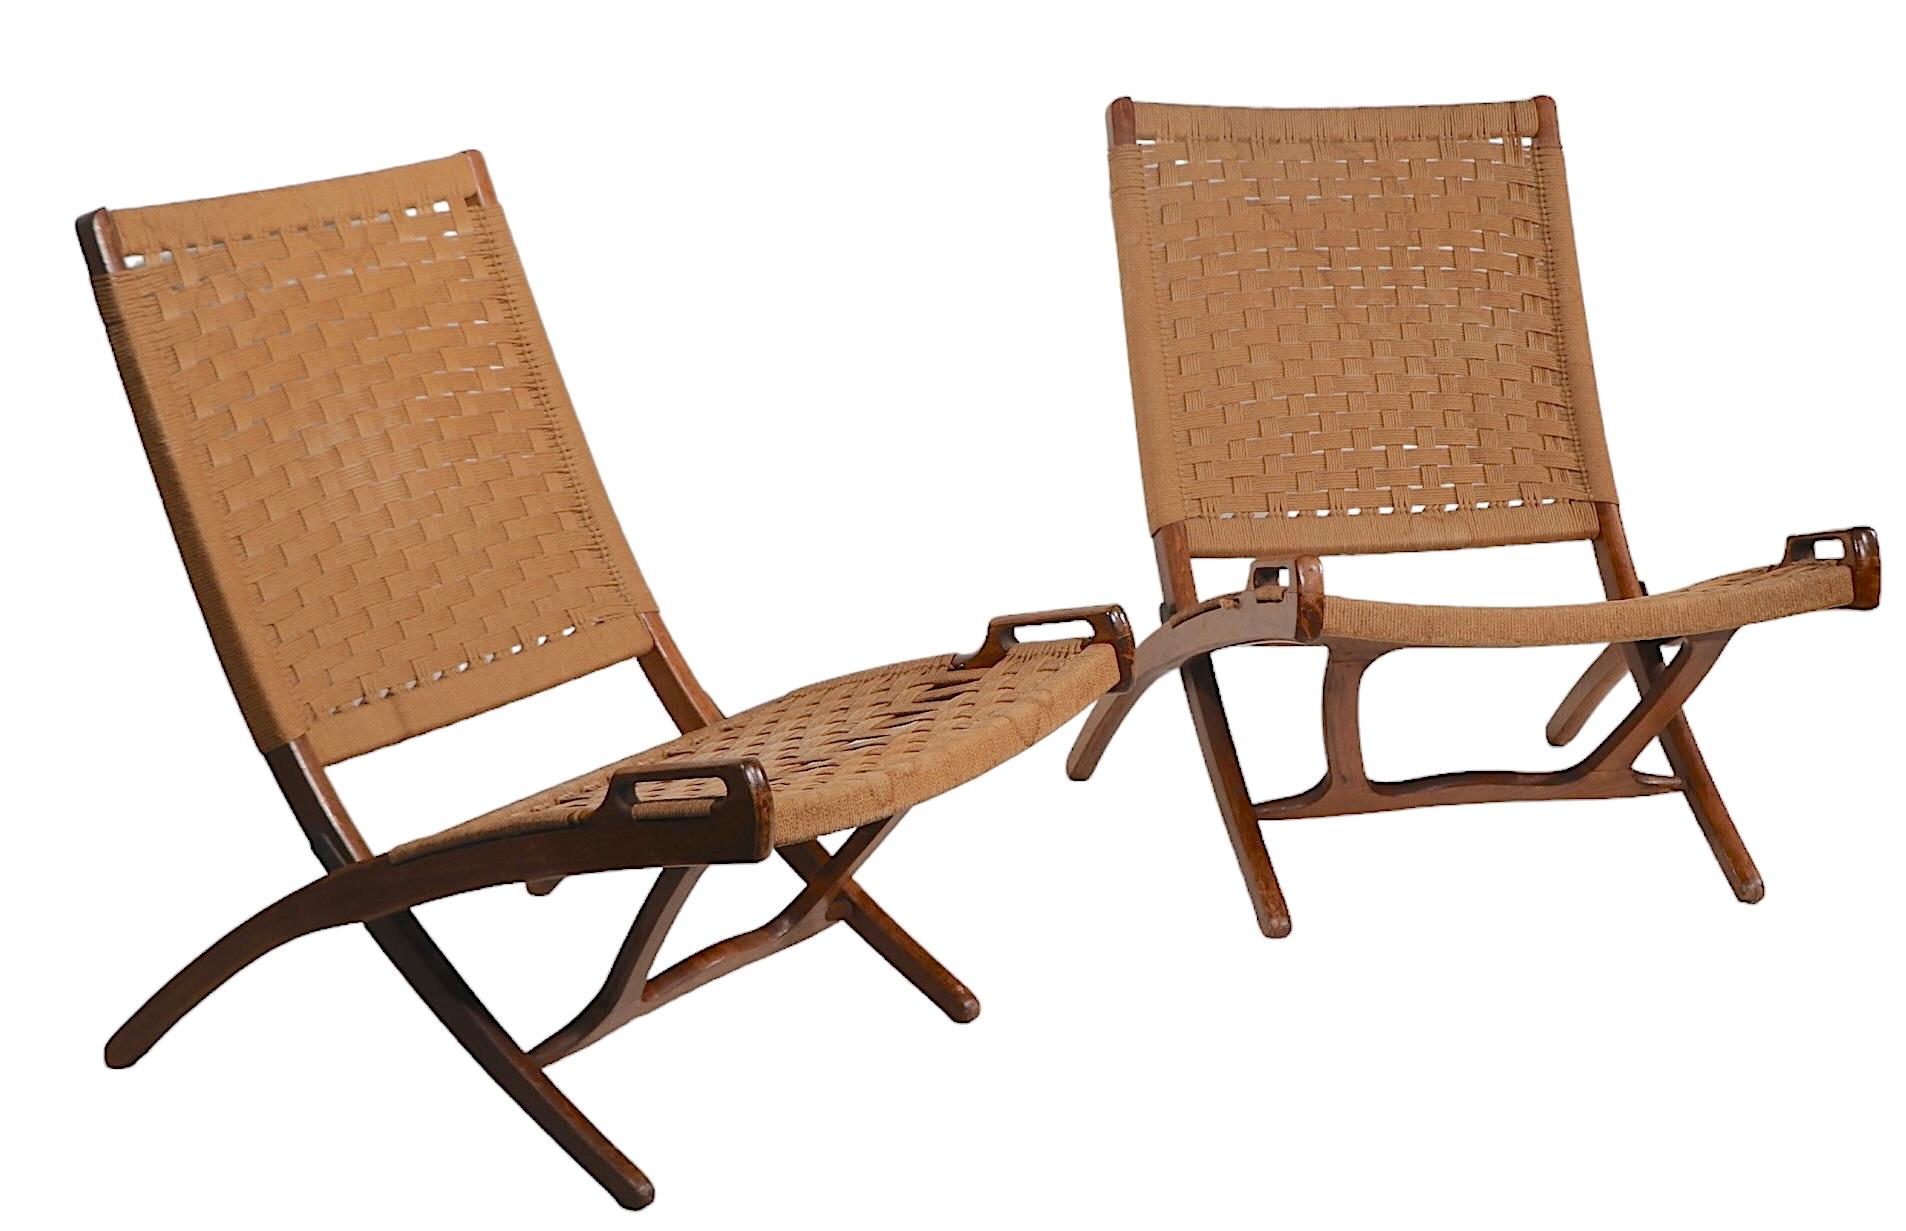 Exceptional pair of folding lounge chairs, Made in Yugoslavia, after the iconic Wegner masterpiece. The chairs are in very fine, clean, original, and ready to use condition, showing only light cosmetic wear, normal and consistent with age, specific